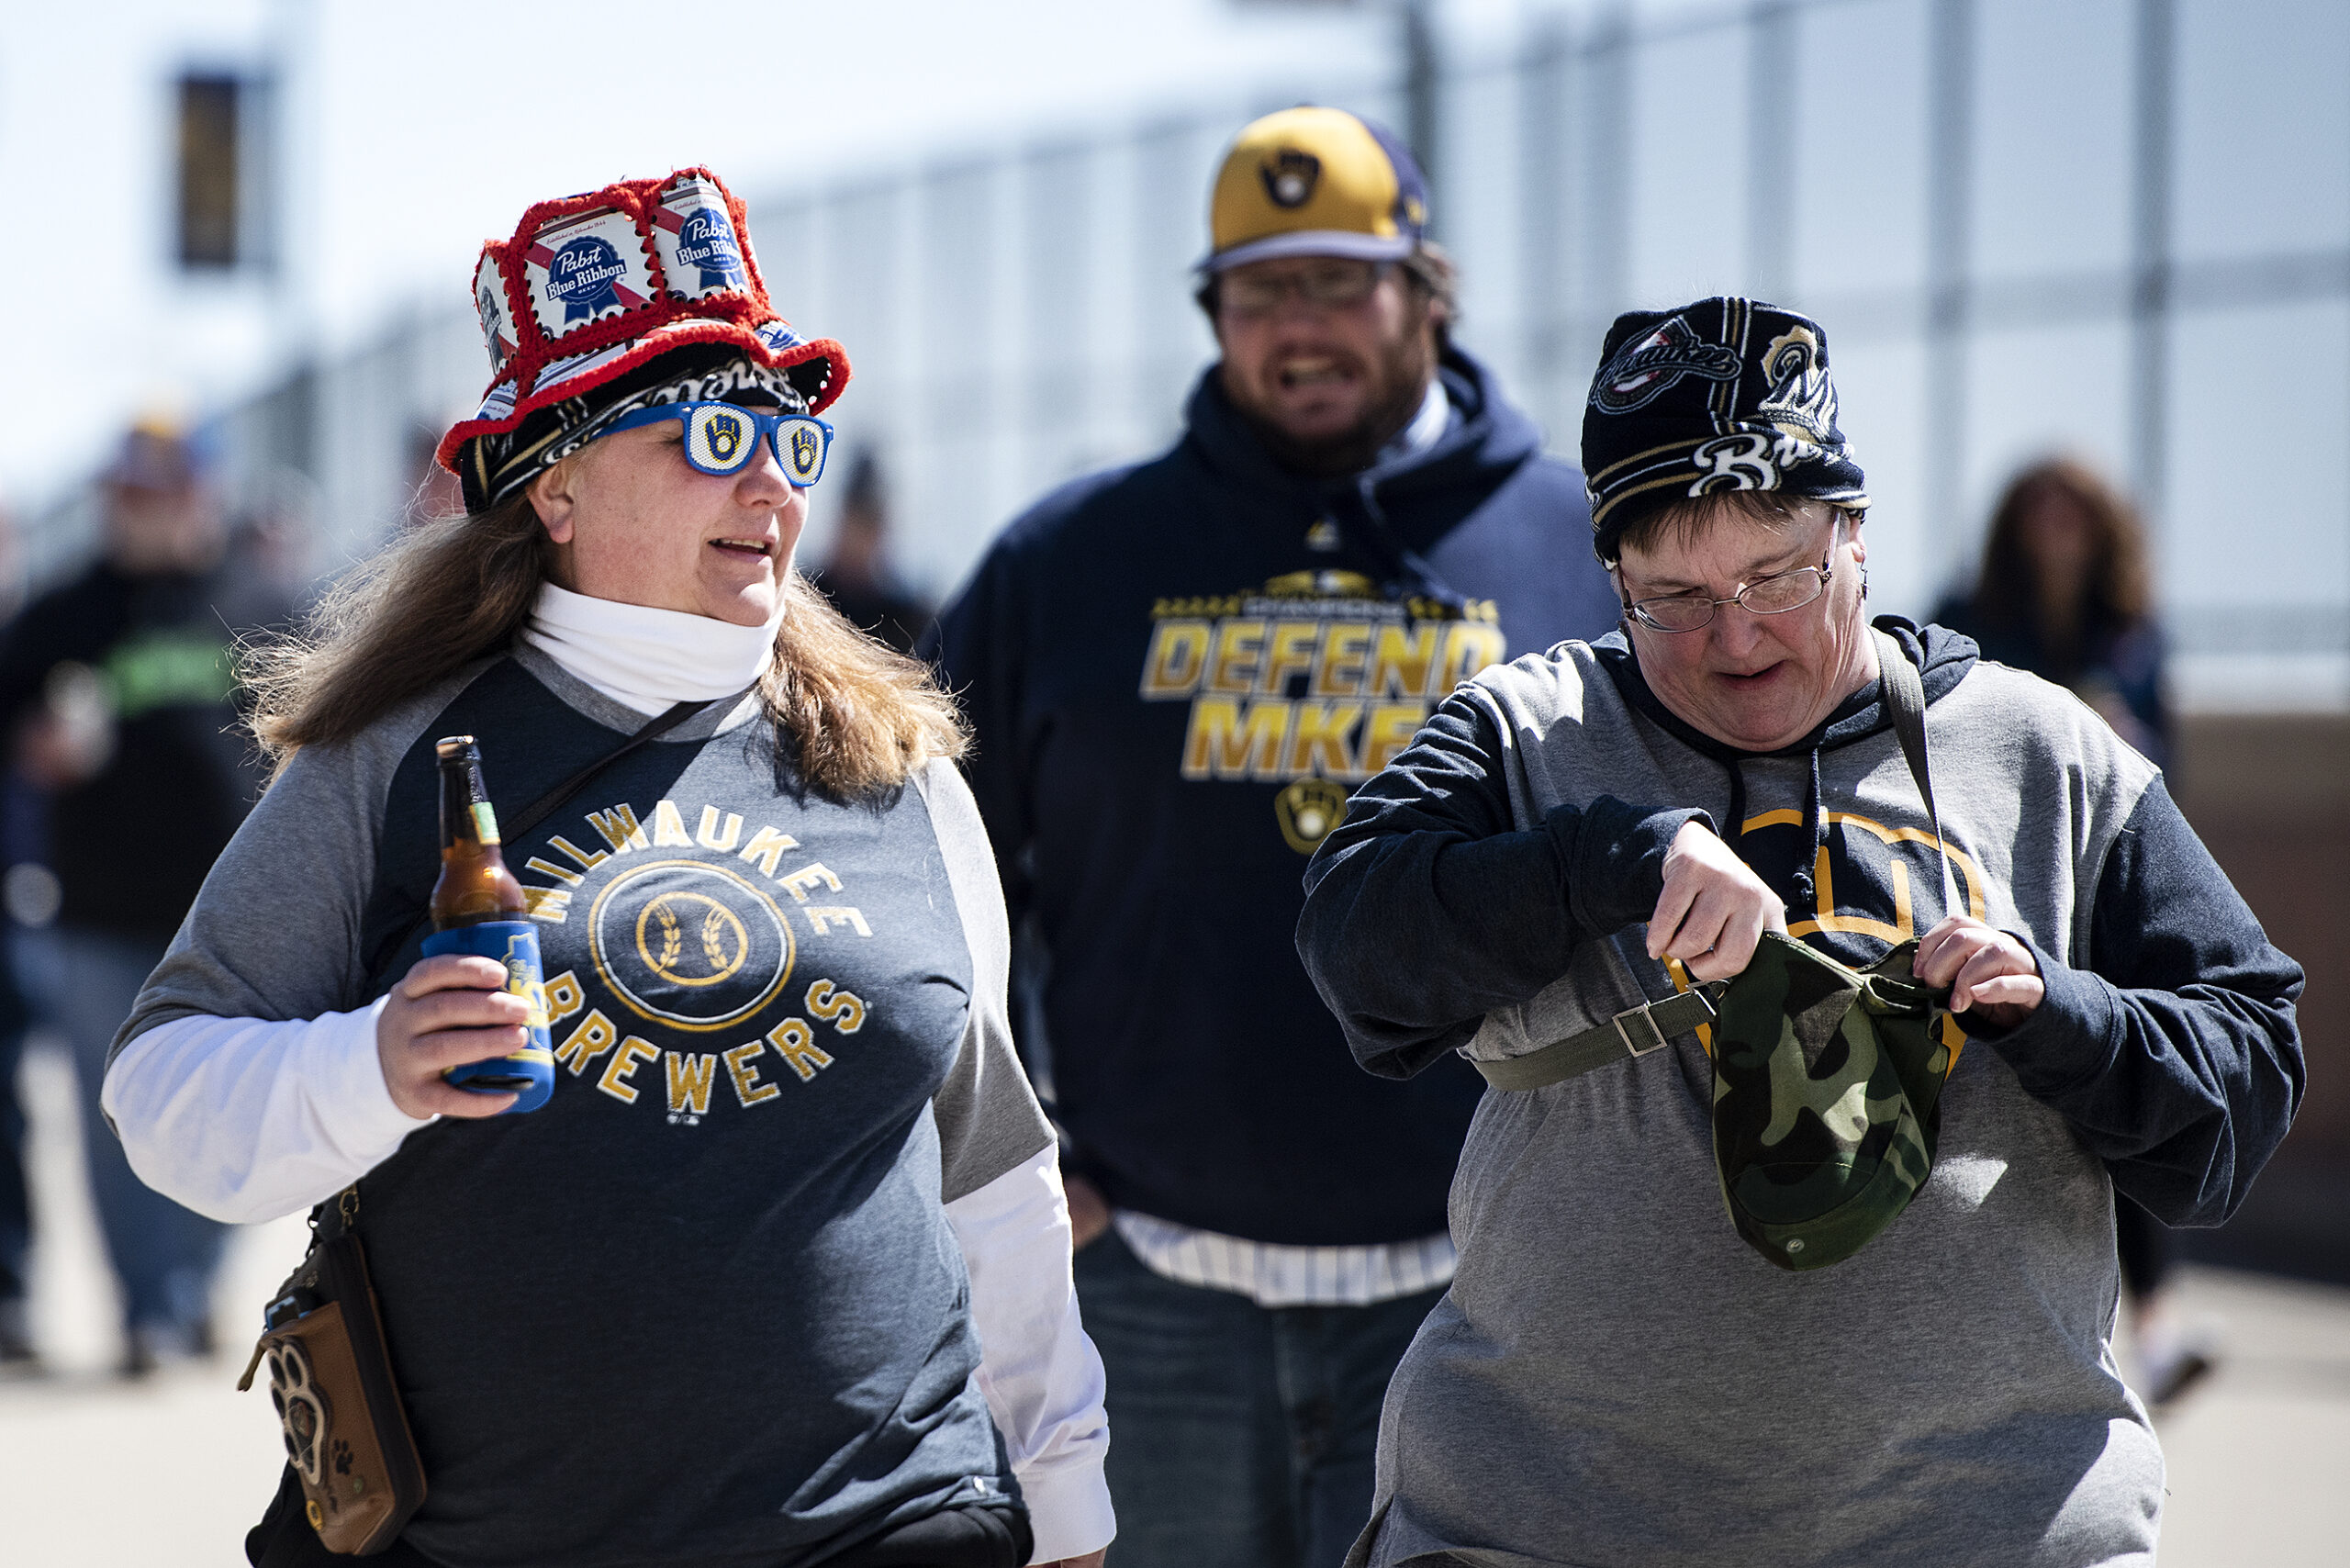 A fan wears a glasses with the Brewers logo, a hat made of PBR boxes and a Brewers shirt as she holds a beer walking into the stadium.